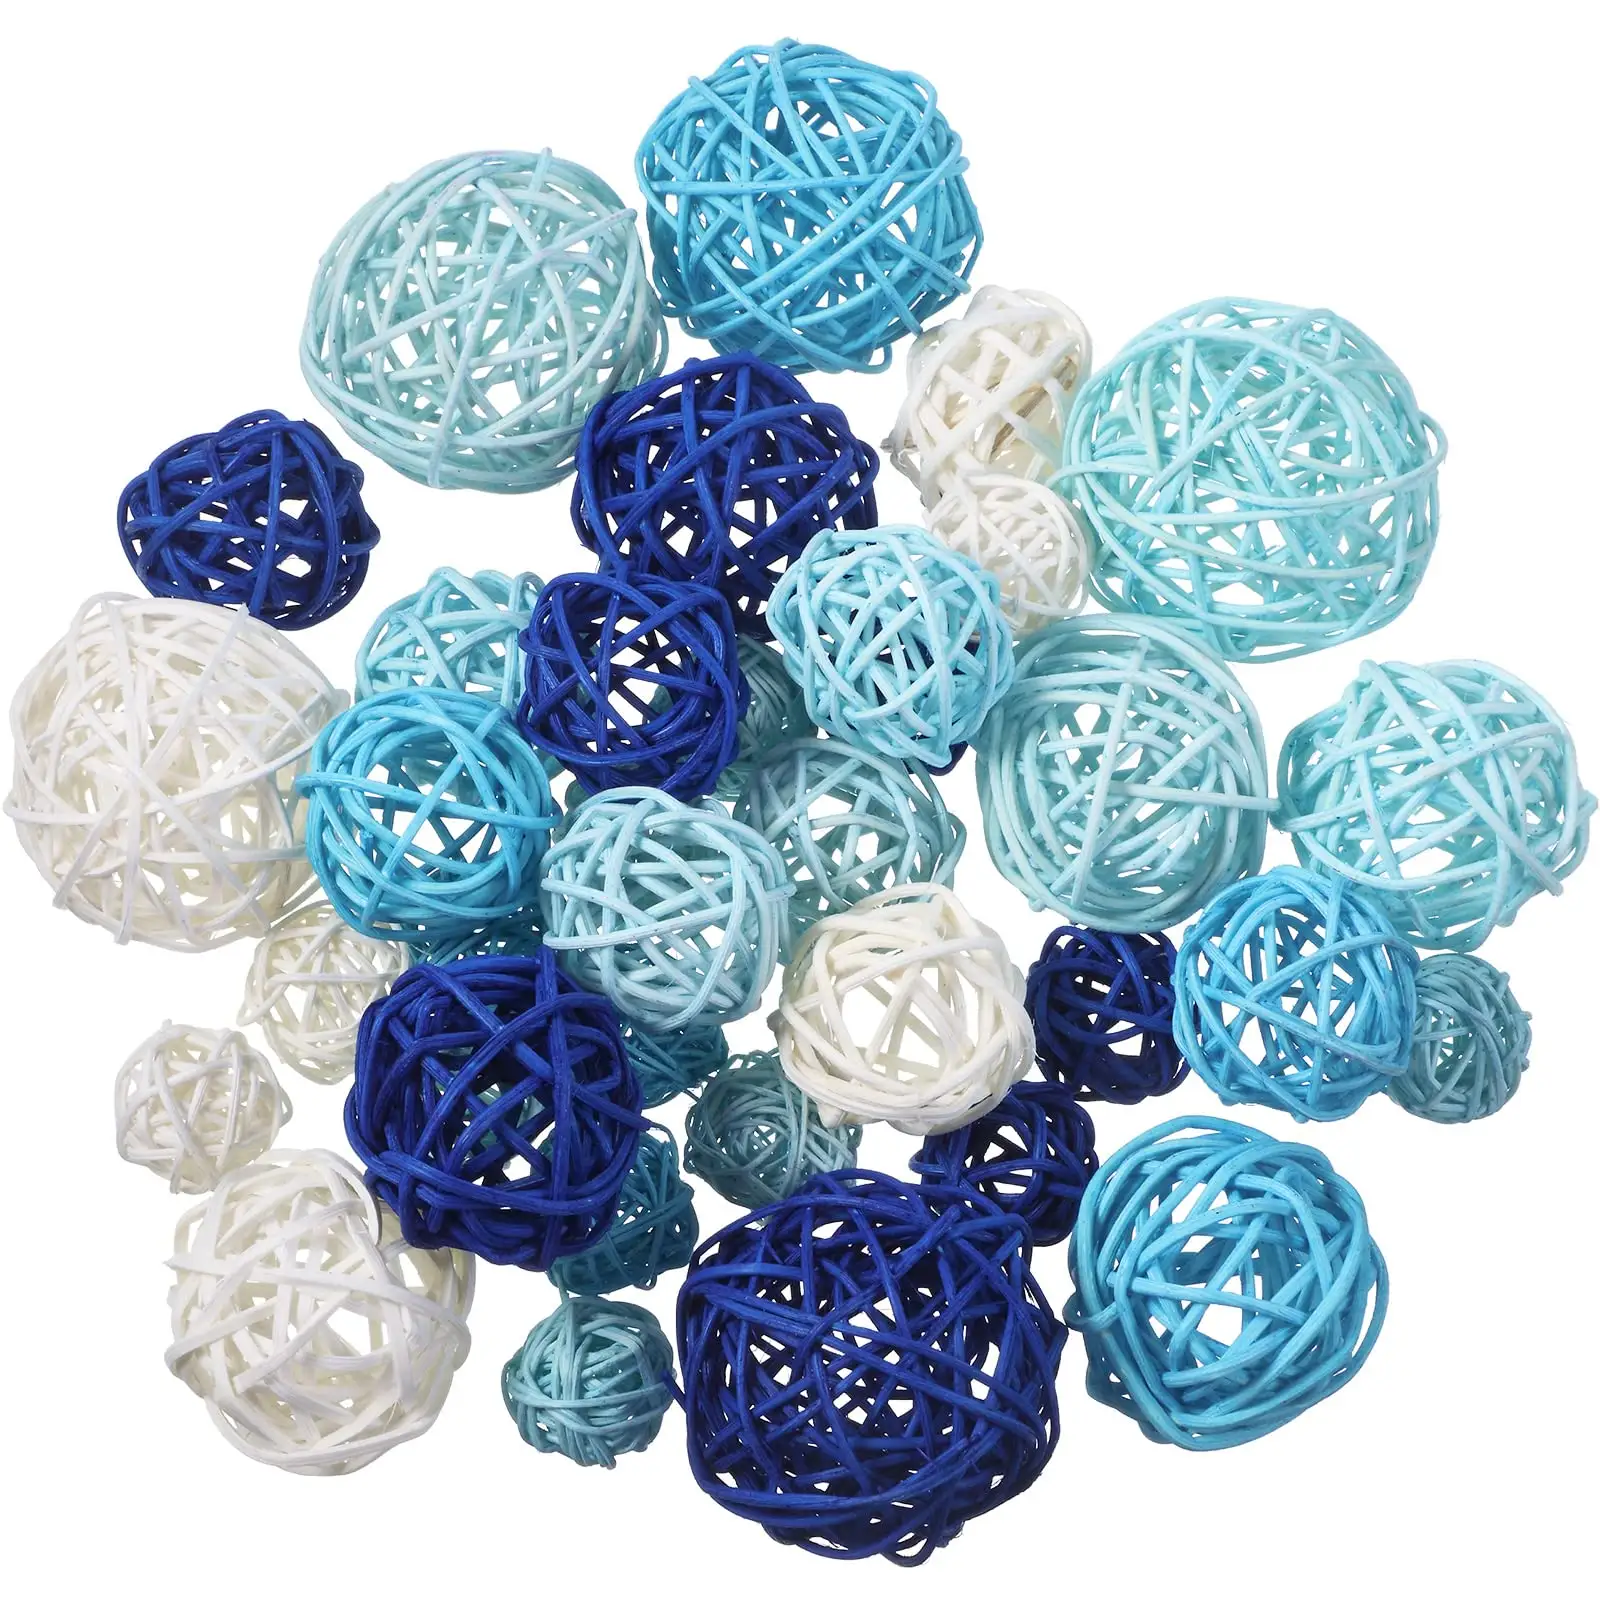 Colorful Decorative Orbs Vase Fillers Party Wedding Decoration Aromatherapy Accessories Decoration Wicker Rattan Balls